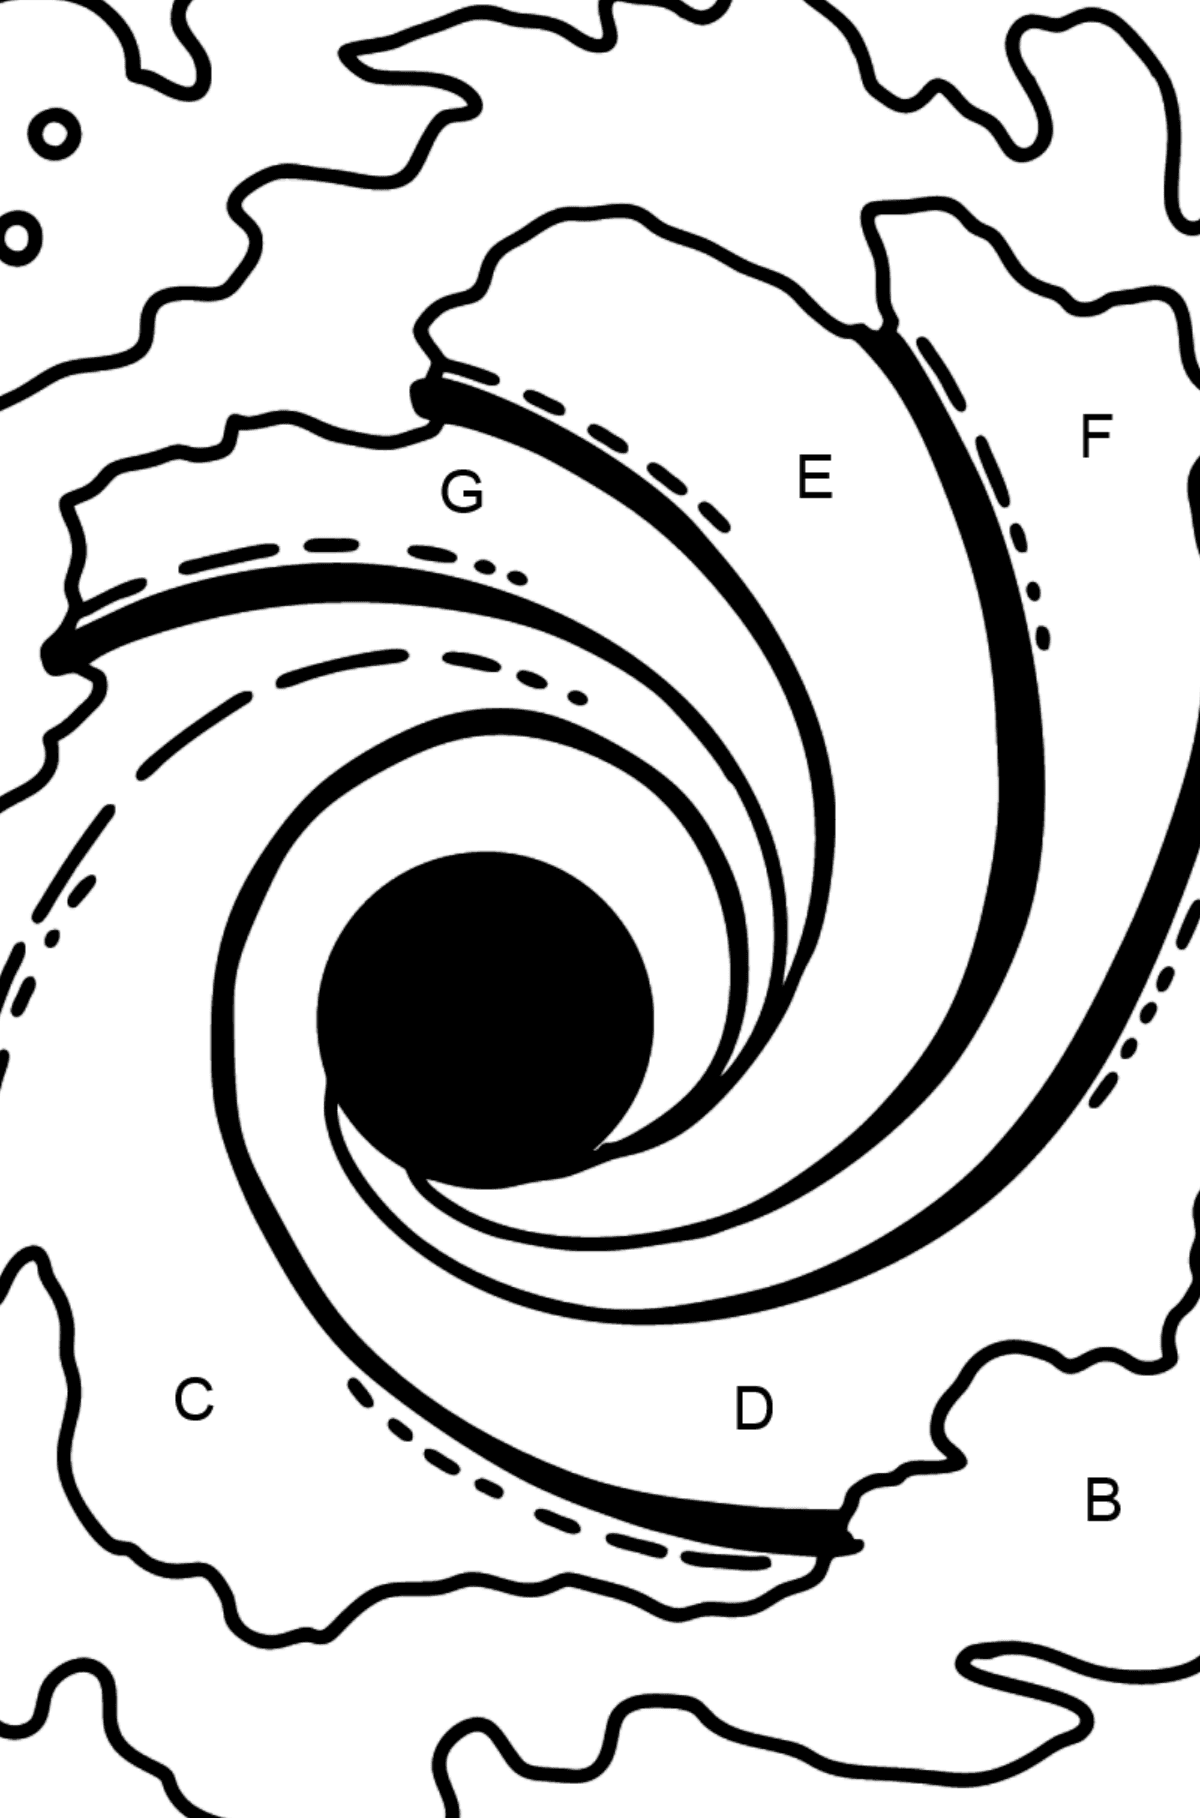 Black Hole coloring page ♥ Online or Printable for Free!